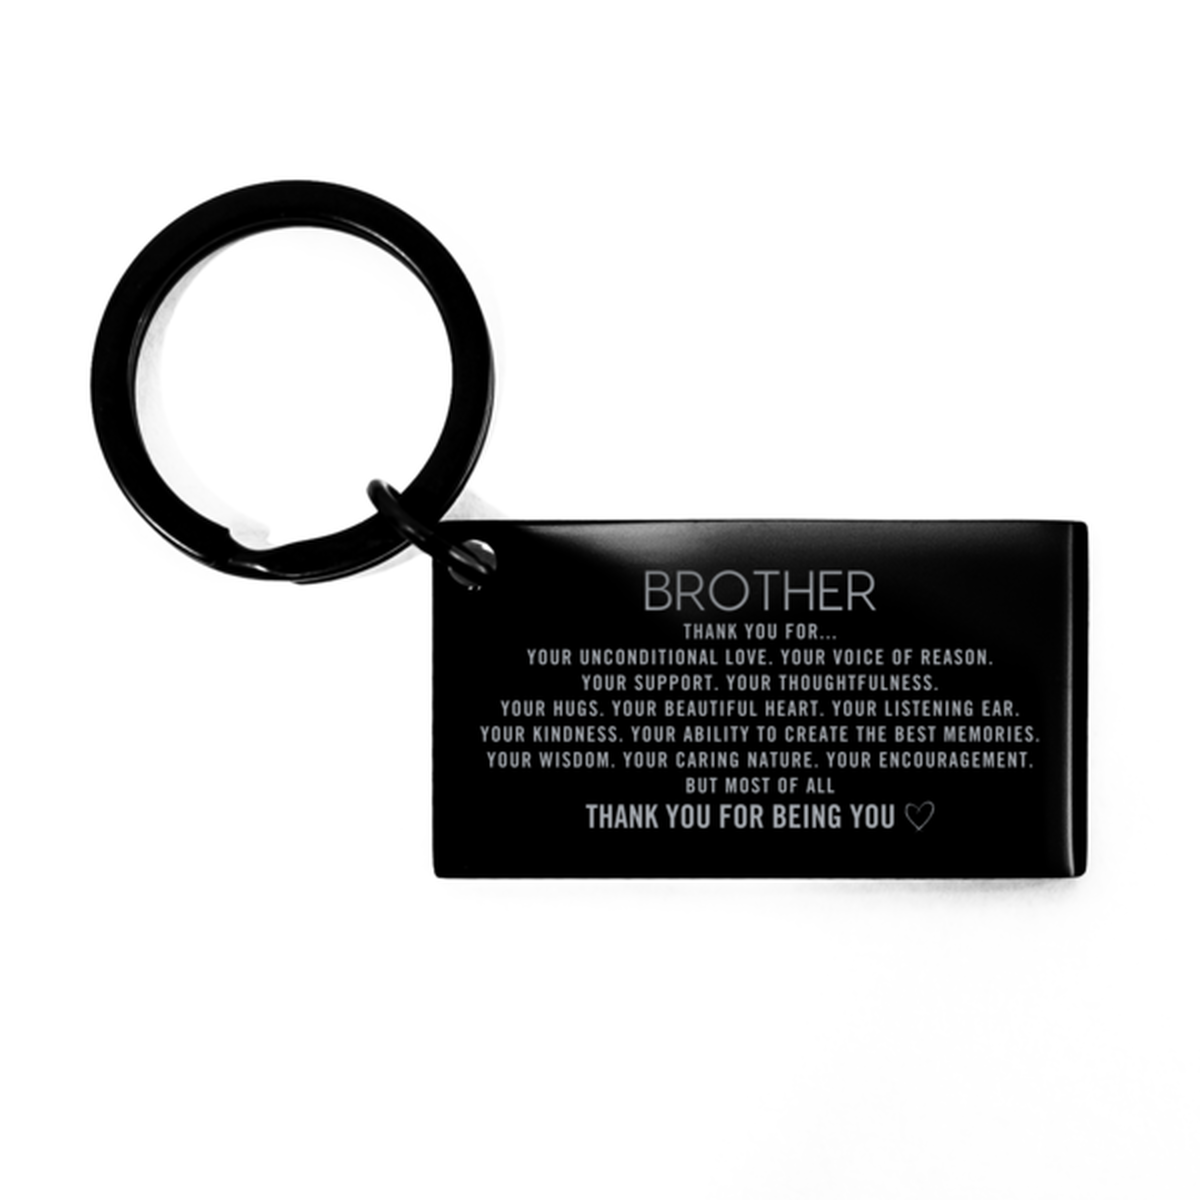 Brother Keychain Custom, Engraved Gifts For Brother Christmas Graduation Birthday Gifts for Men Women Brother Thank you for Your unconditional love